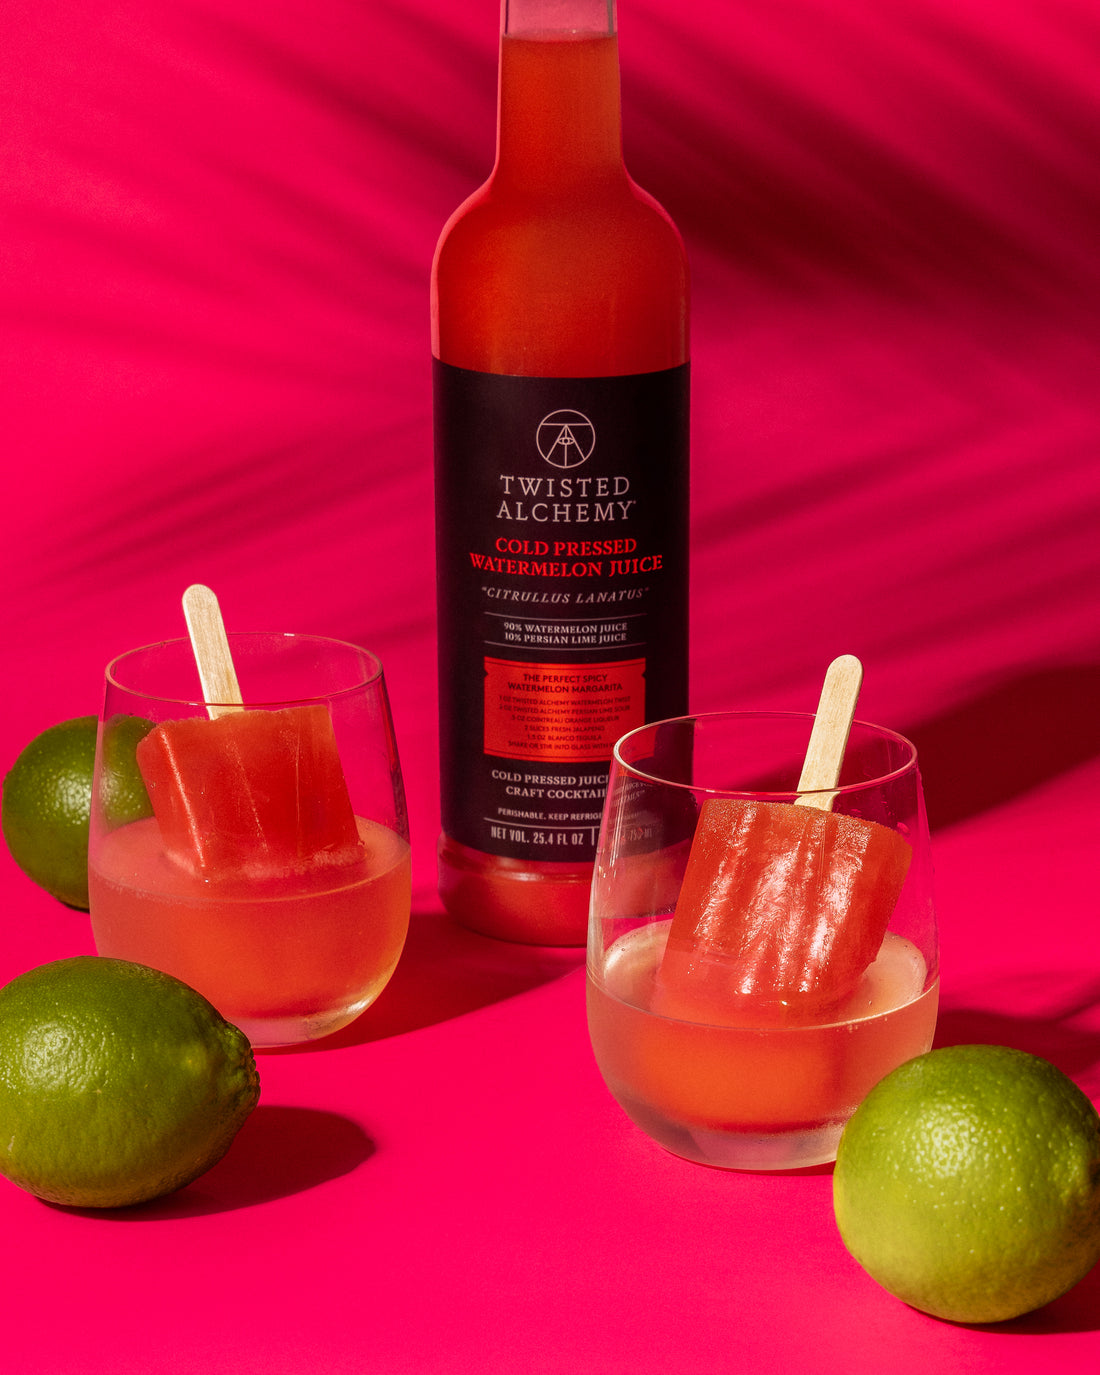 Two popsicles in glasses in front of a bottle of Twisted Alchemy watermelon juice, surrounded by limes